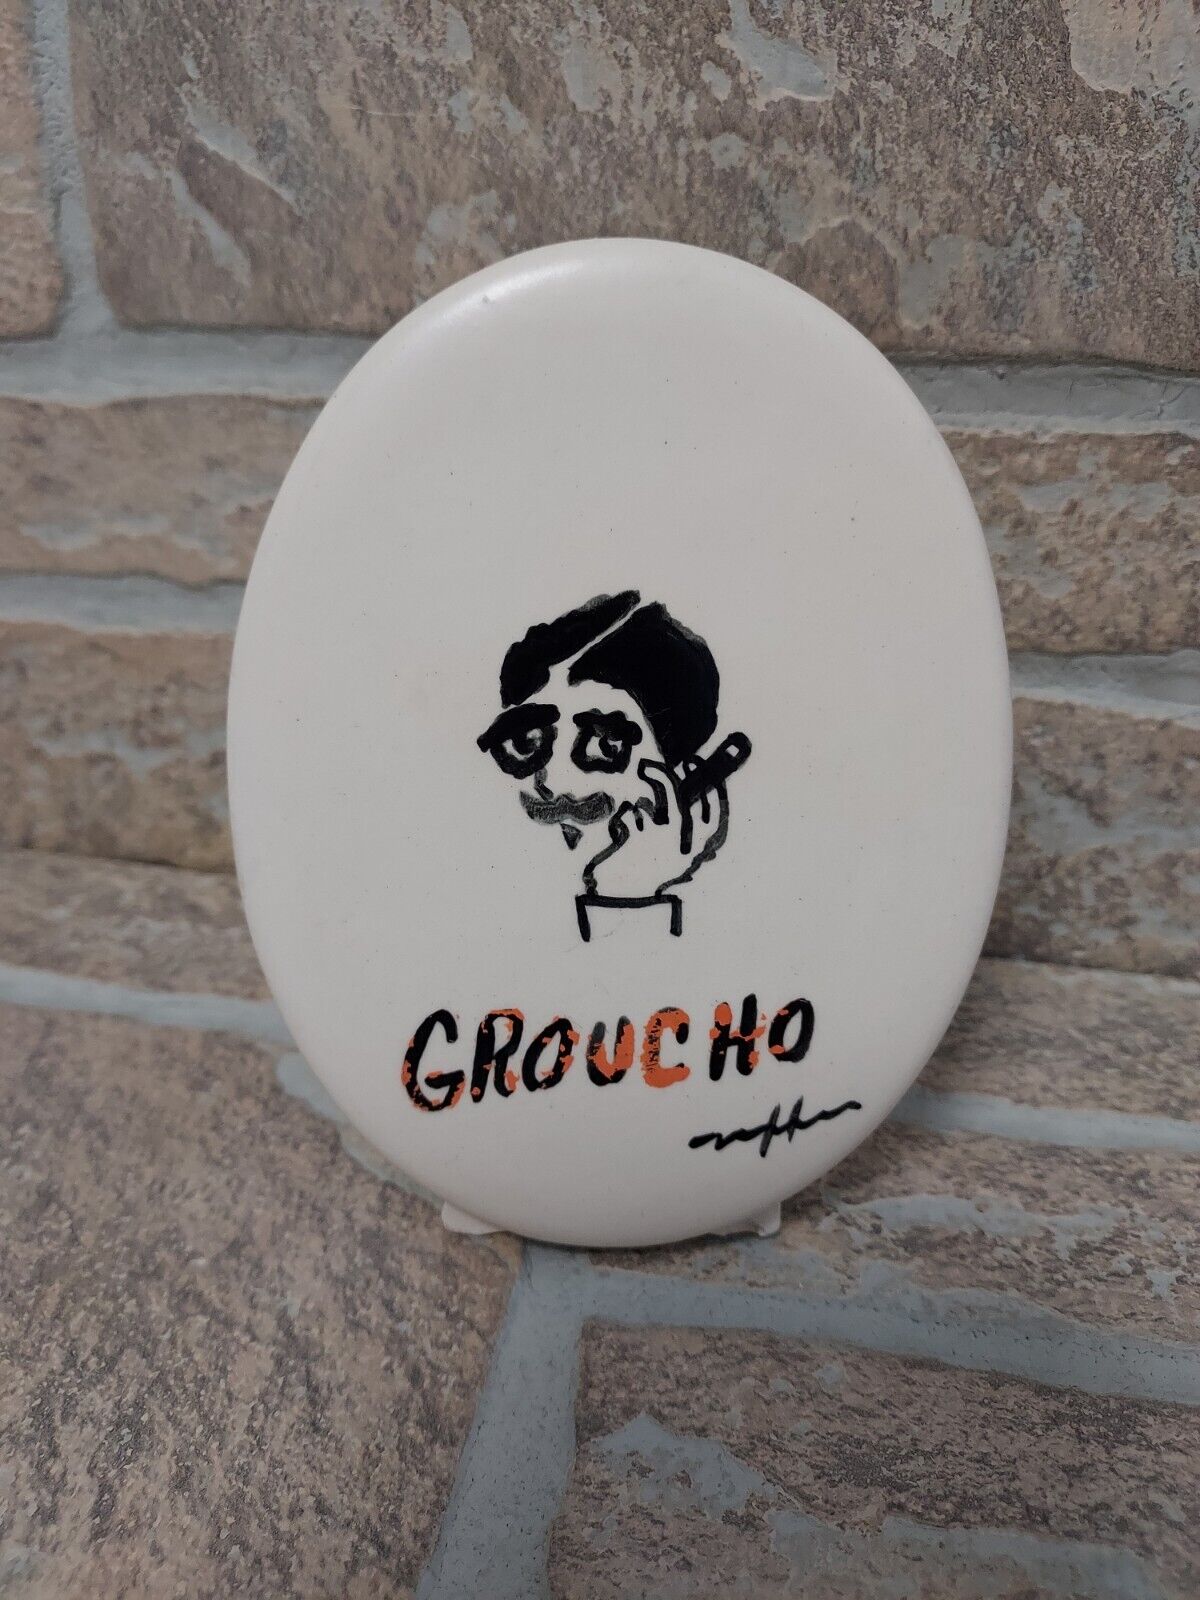 Groucho Marx Ceramic Oval Desk Sitter Hand Painted Signed